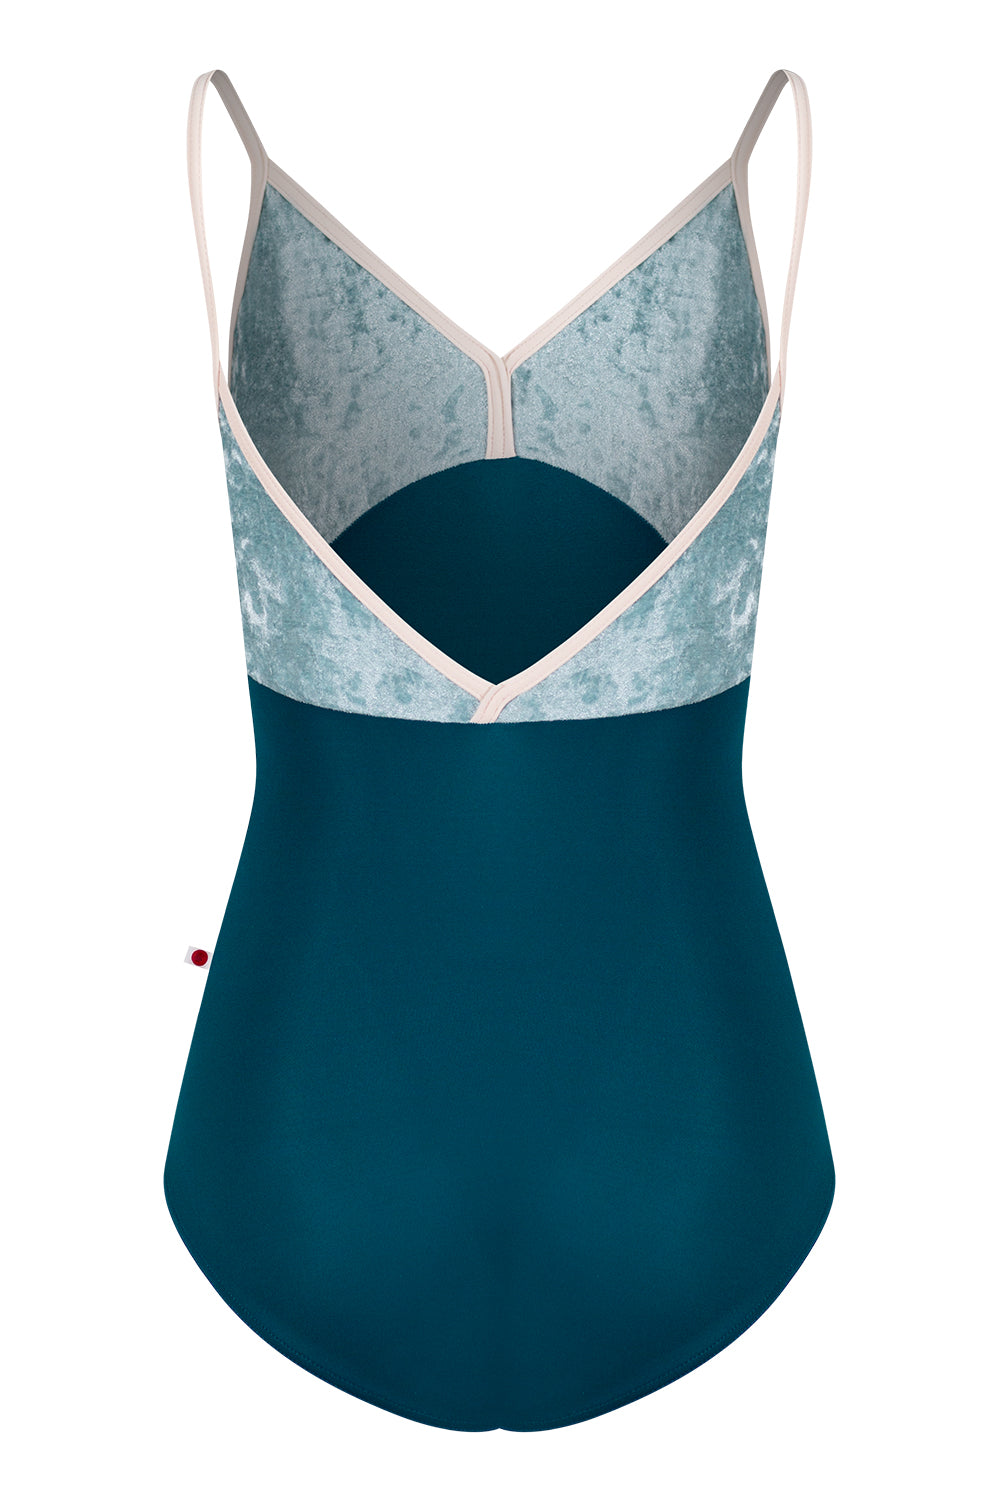 Daria leotard in N-Ottanio body color with CV-Icea top color and T-Misty Rose trim color